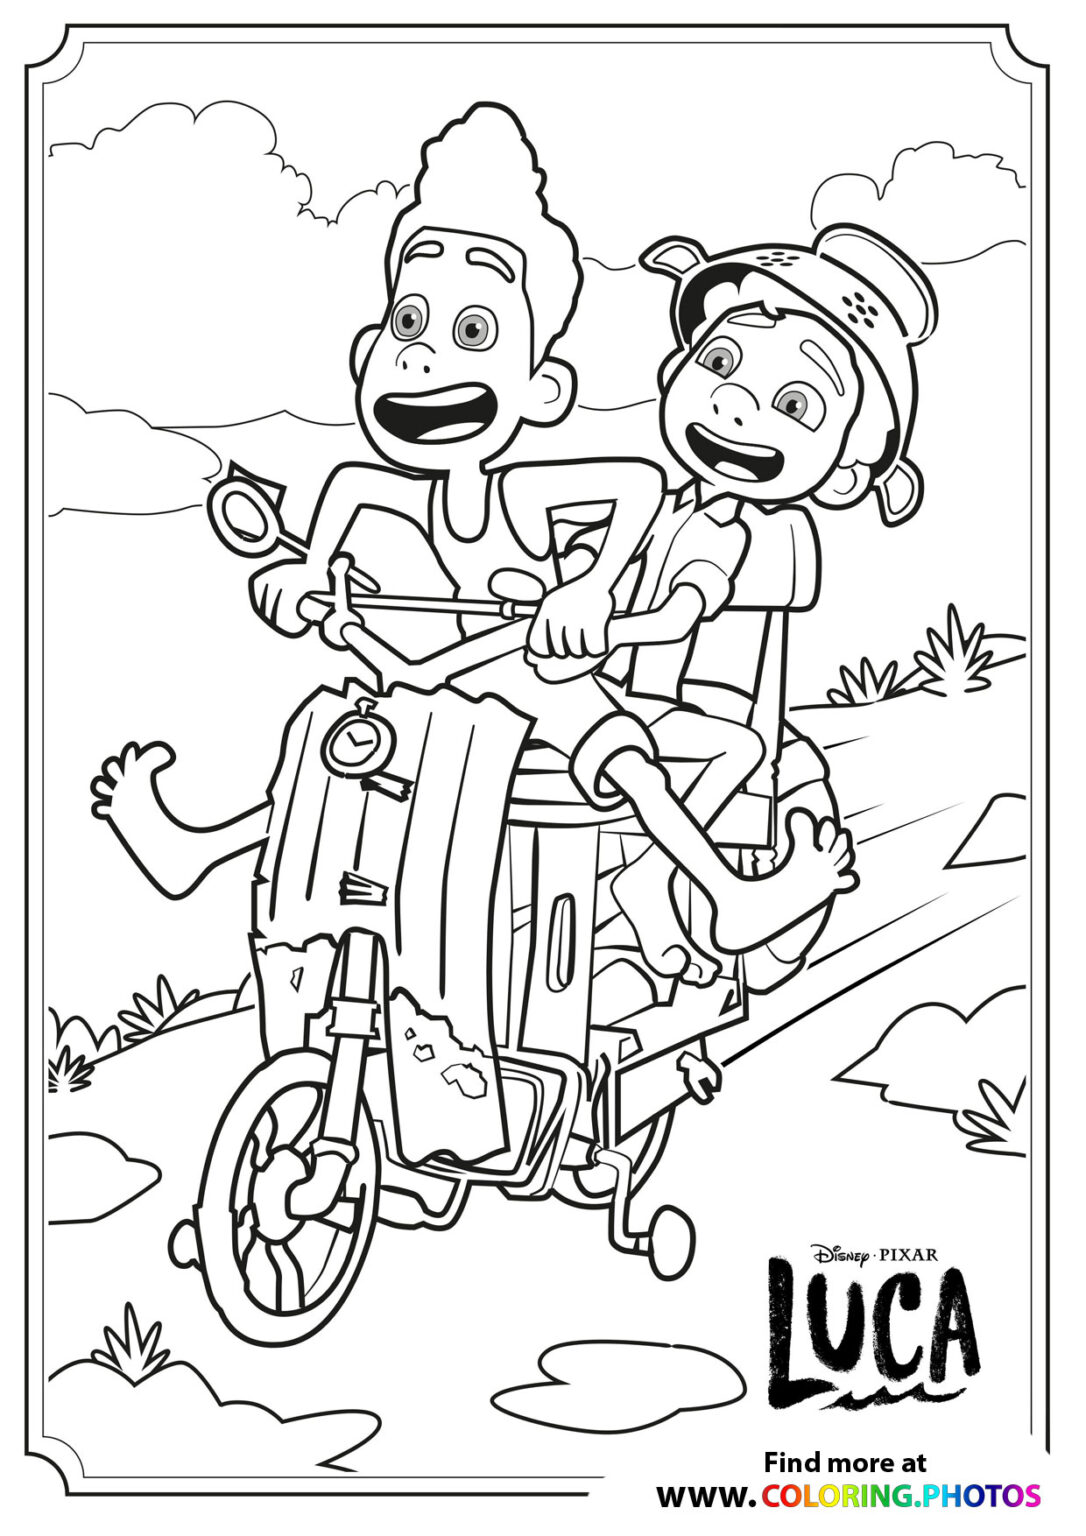 encanto-printable-coloring-pages-customize-and-print